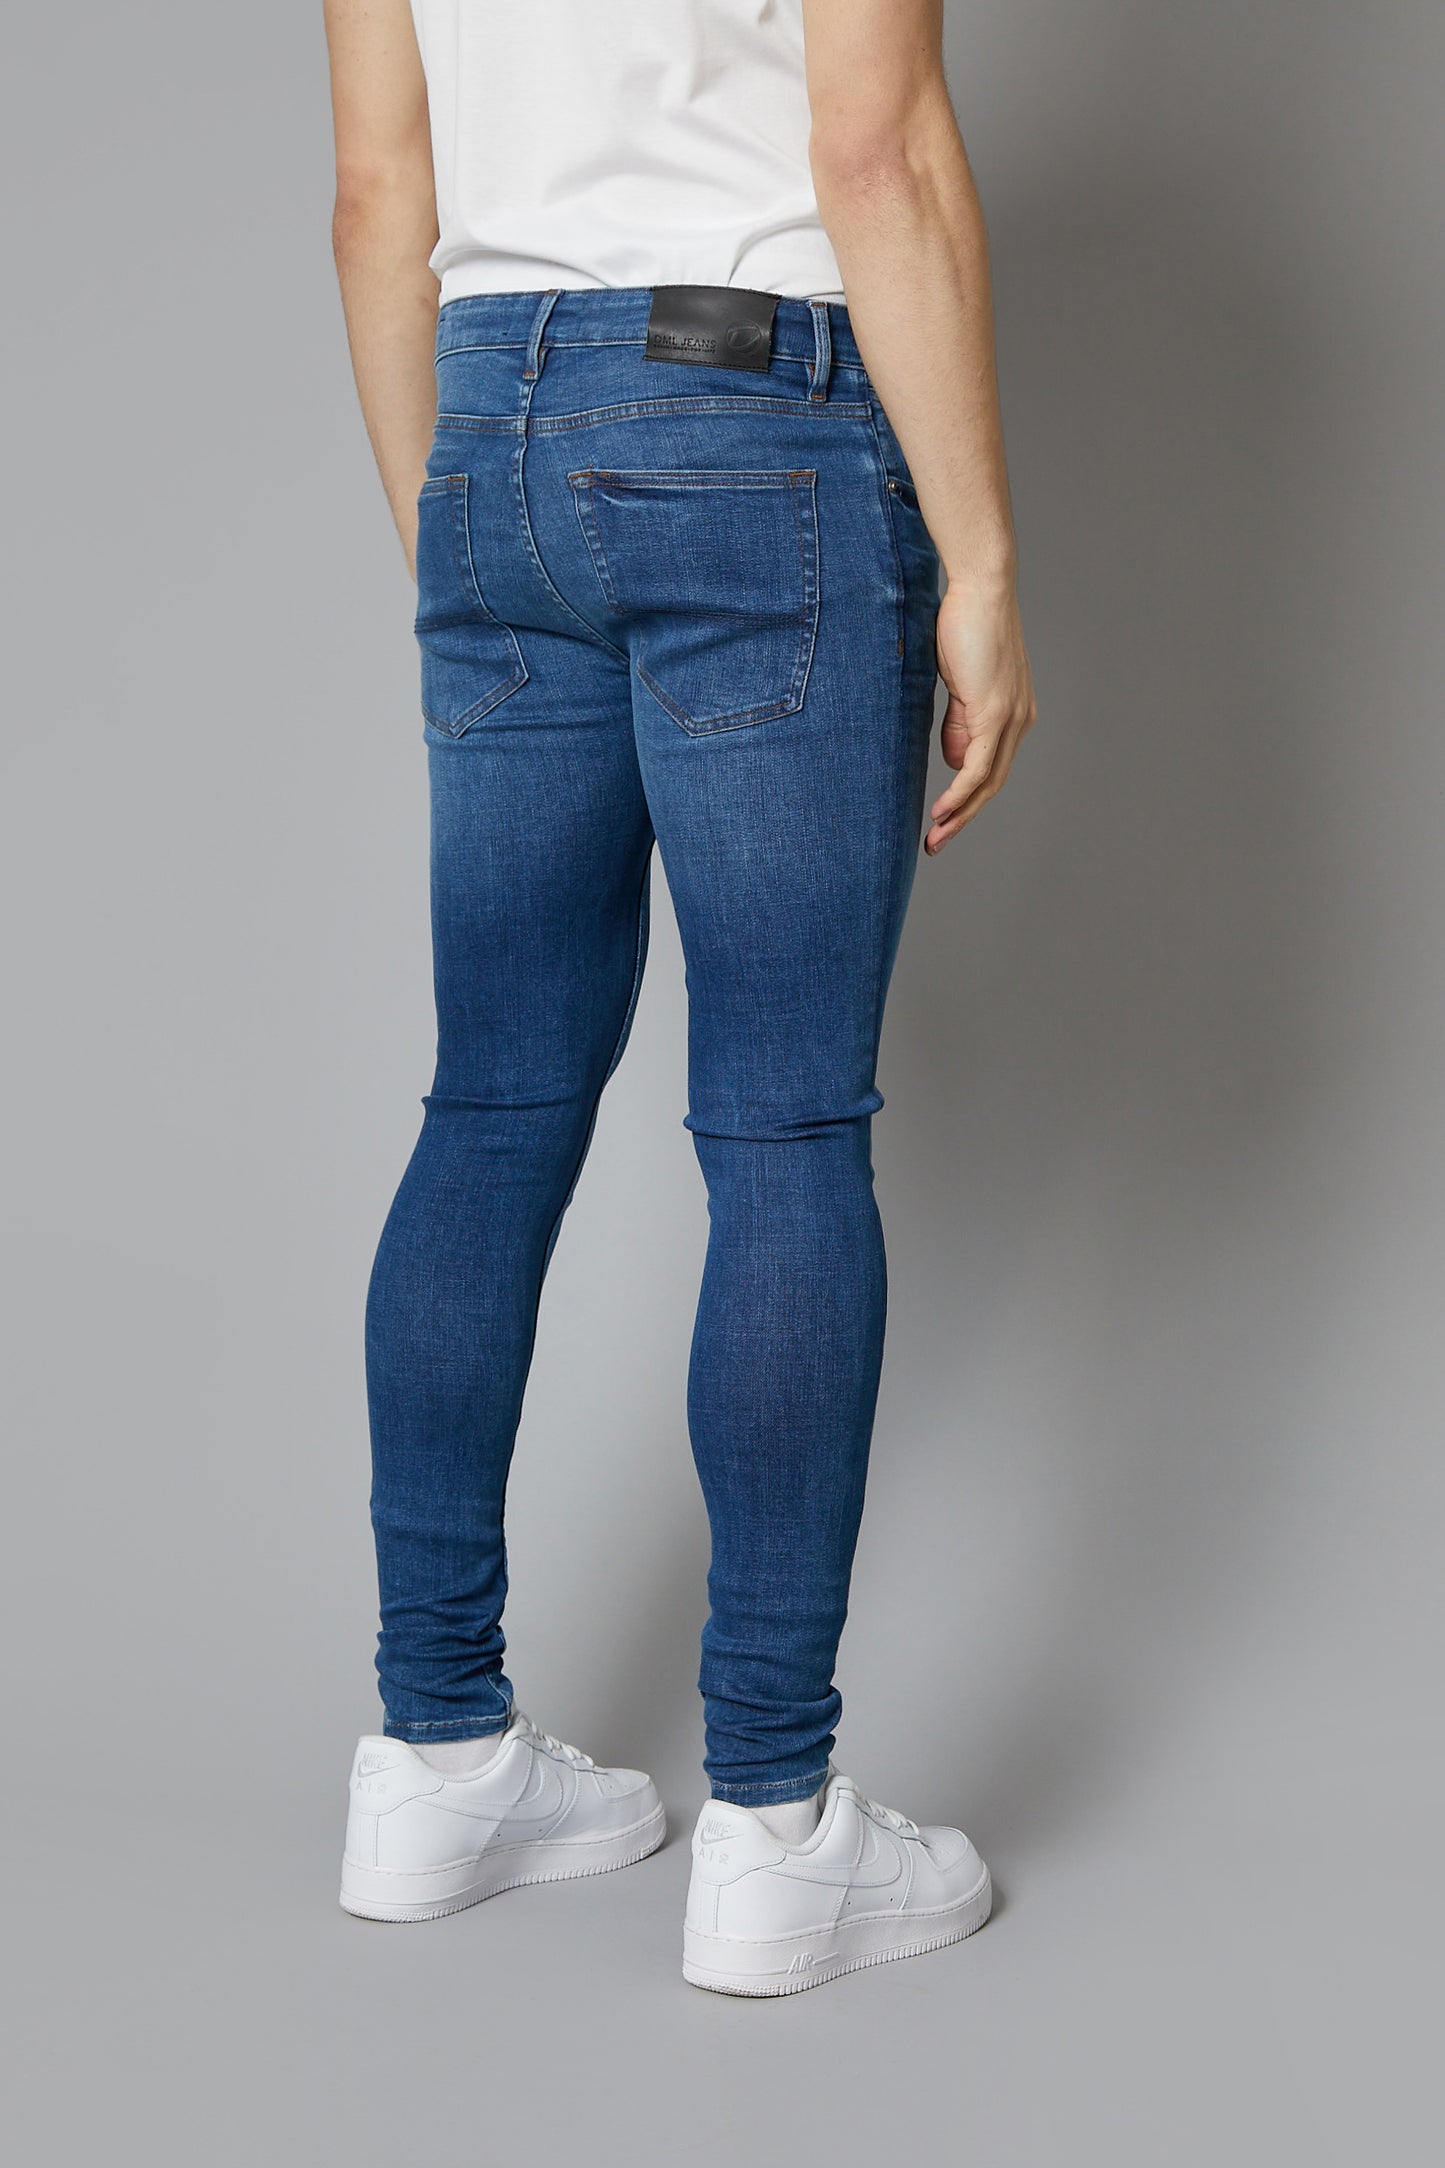 DML Jeans Colorado Super Skinny Fit Jeans In mid Blue